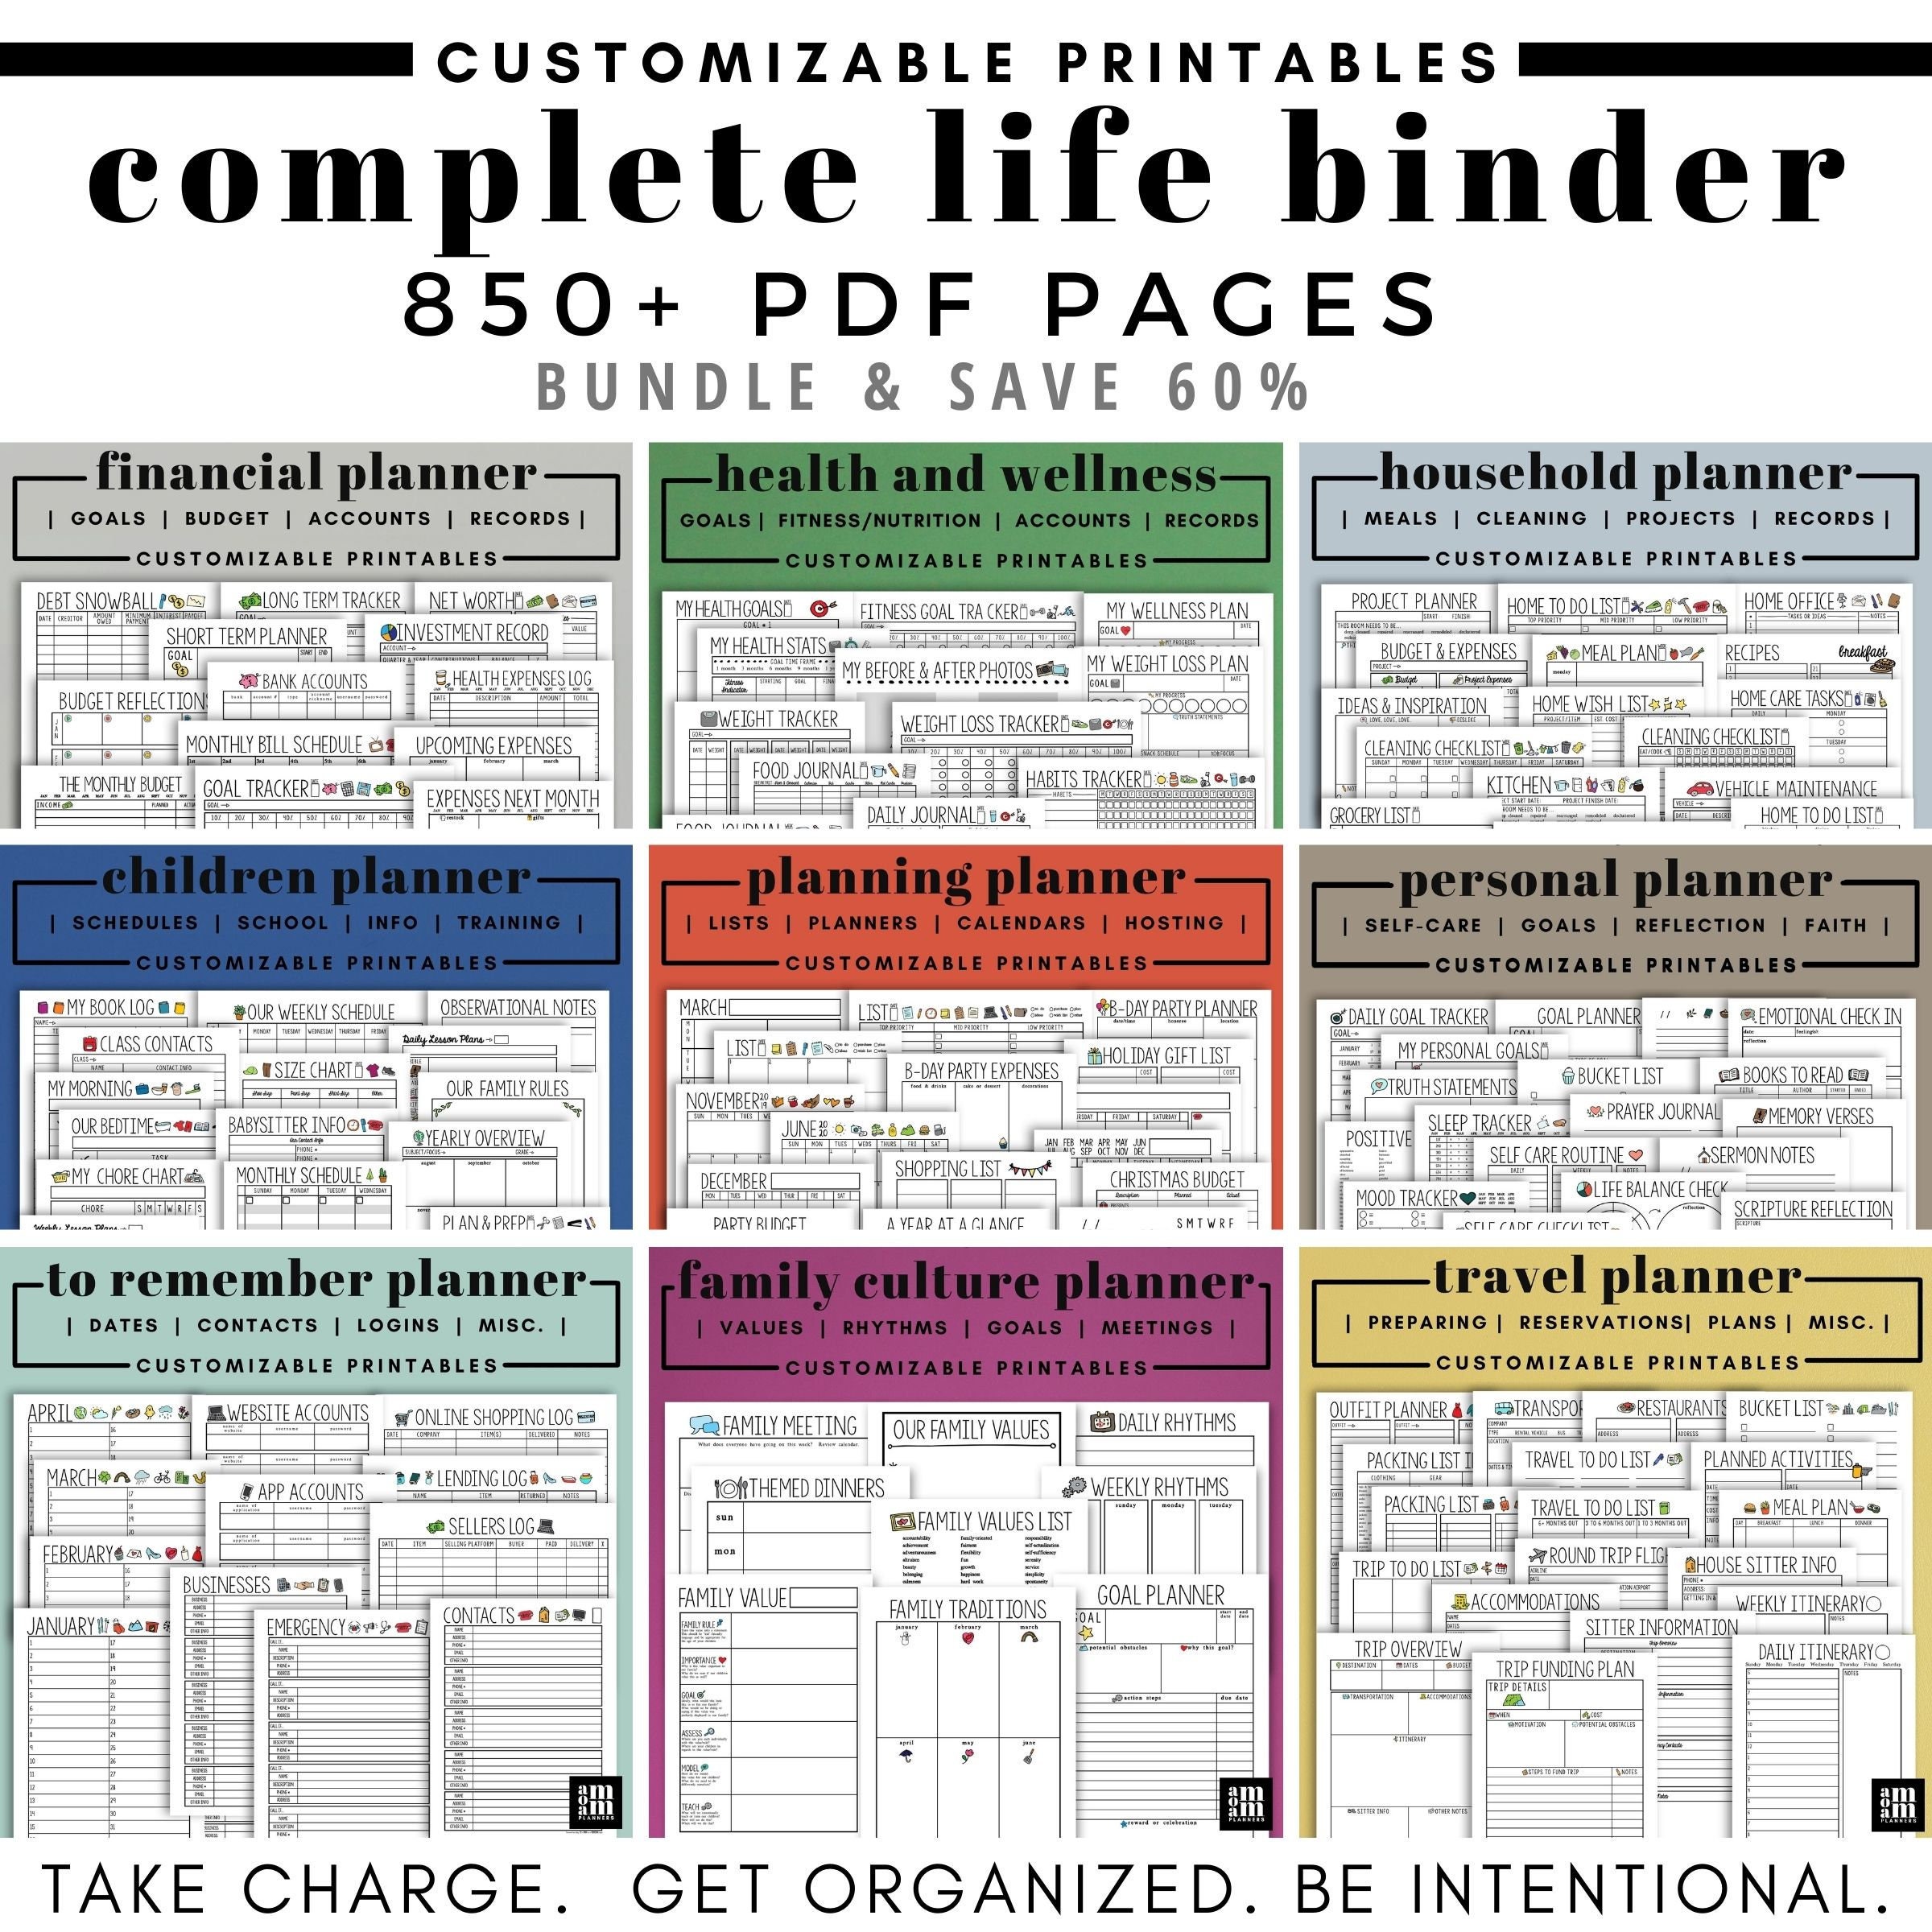 paper-party-supplies-printable-planner-home-management-binder